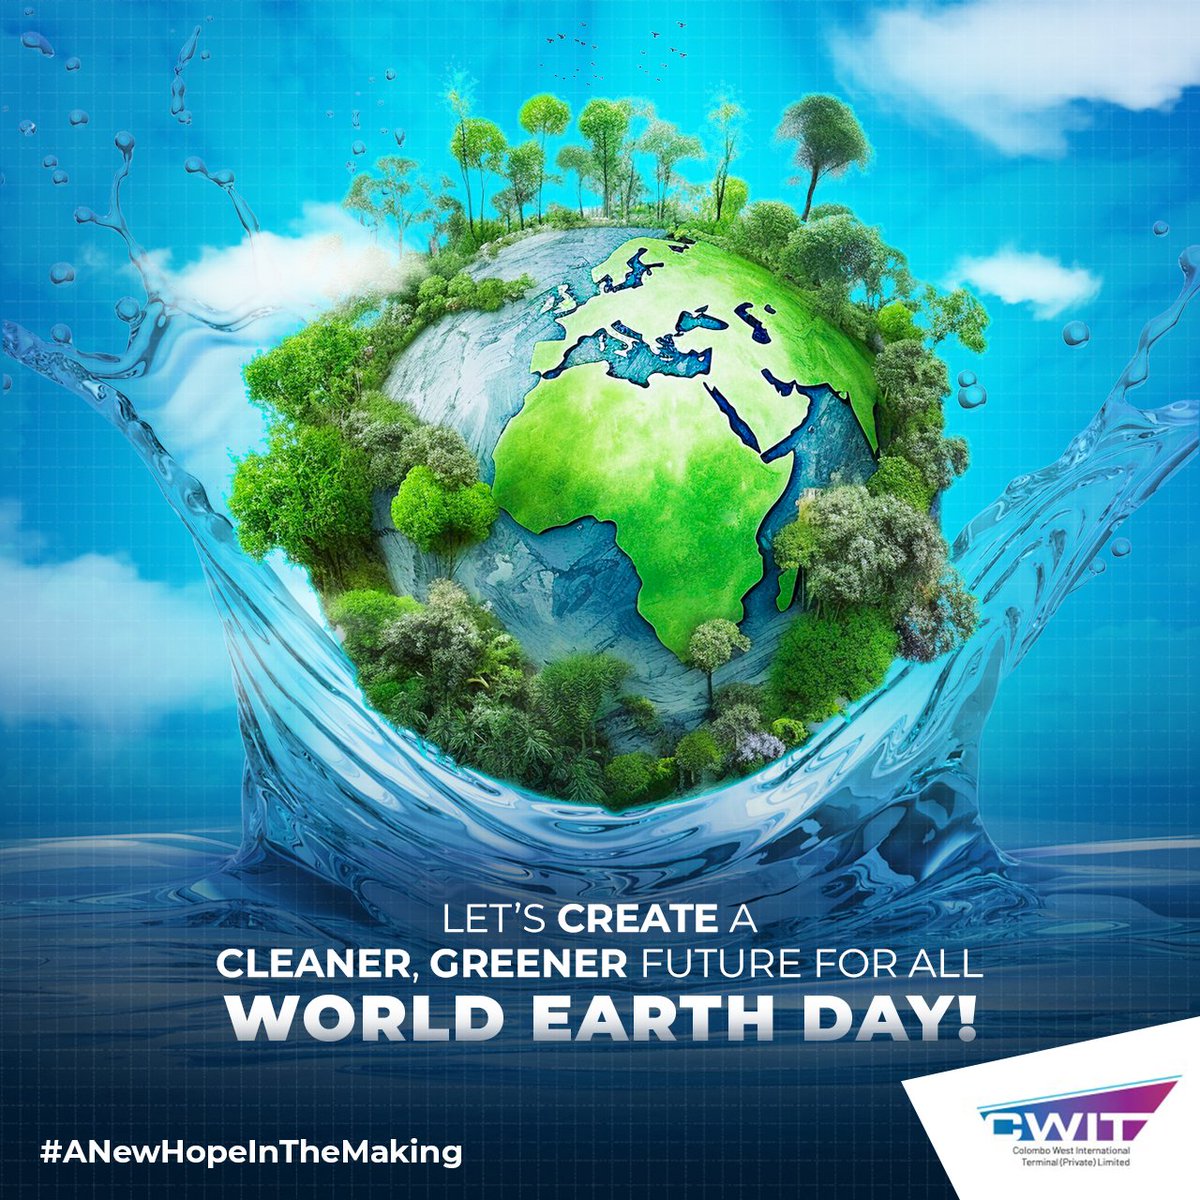 This Earth Day, let's rise to the challenge of addressing plastic pollution and protecting our environment. By coming together and taking action, we can build a more sustainable future for all living beings.

#CWIT #ANewHopeInTheMaking #EarthDay